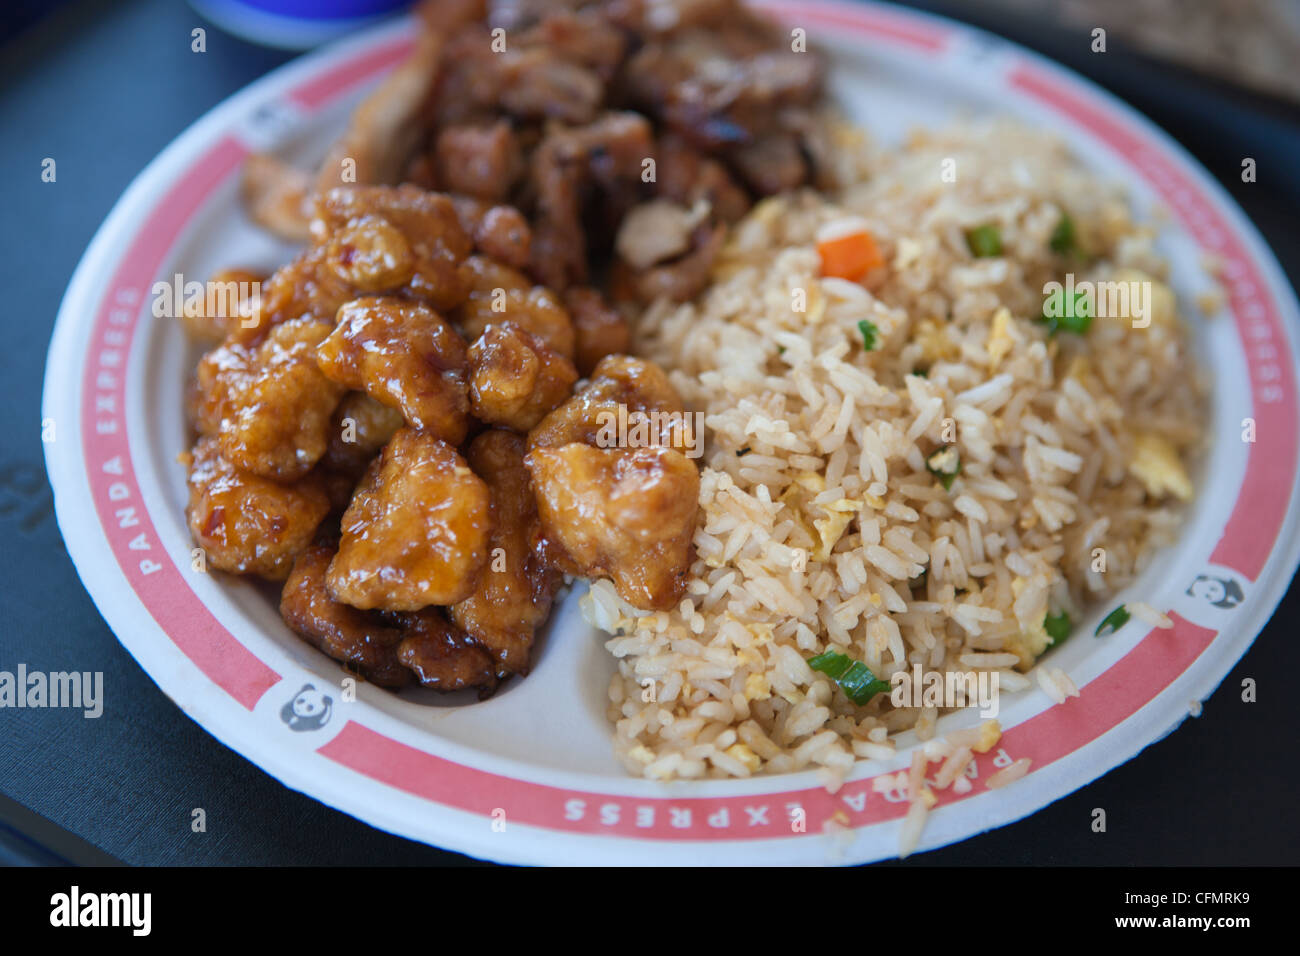 Close Up Of A Plate Of Orange Chicken And Teriyaki Chicken With Fried Rice From Panda Express Stock Photo Alamy